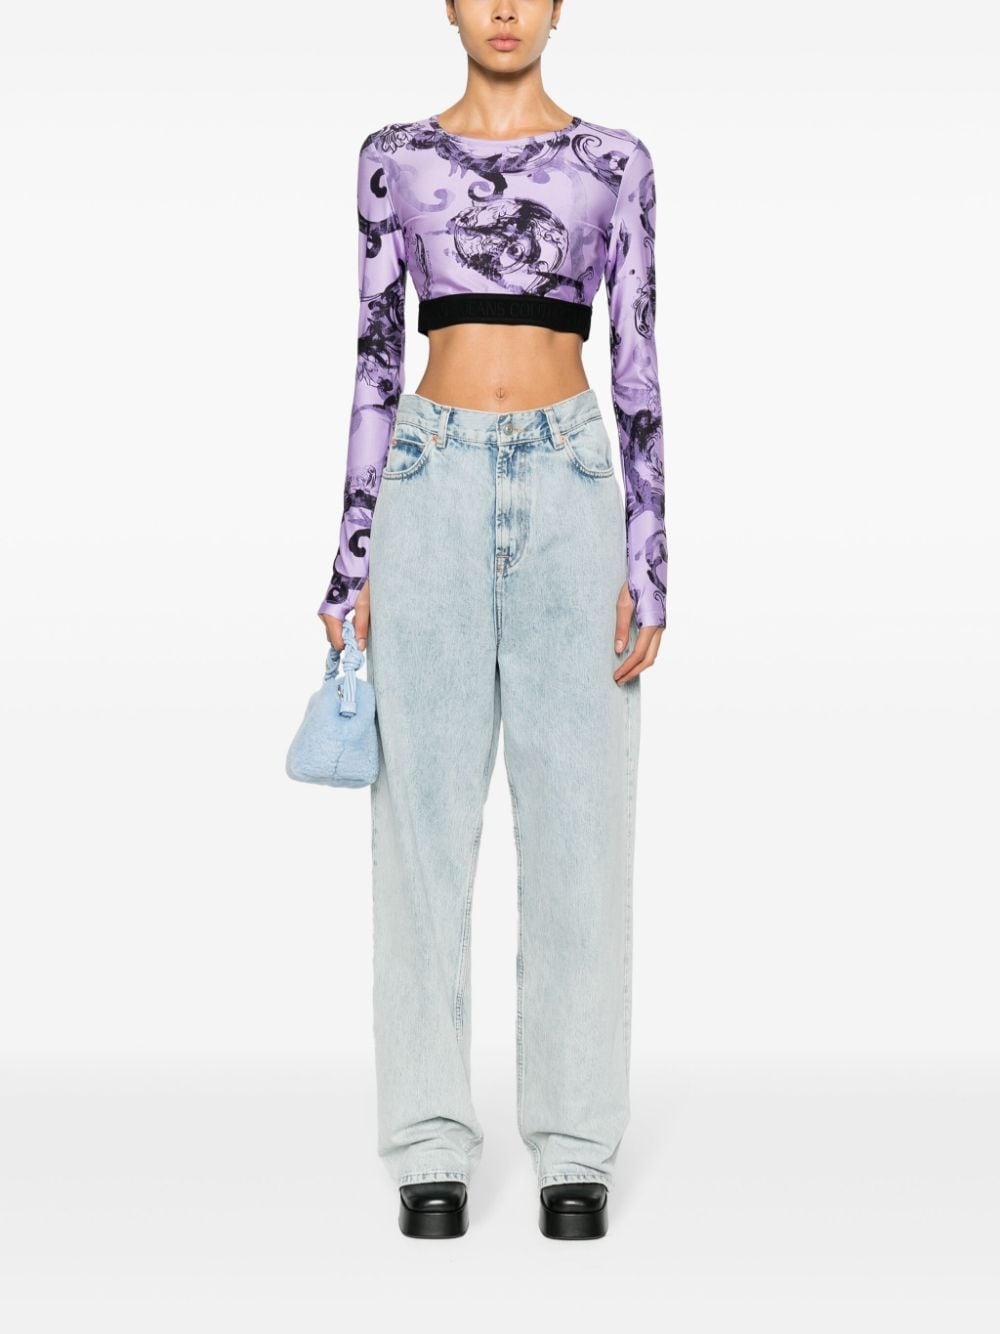 baroque-print cropped top - 2